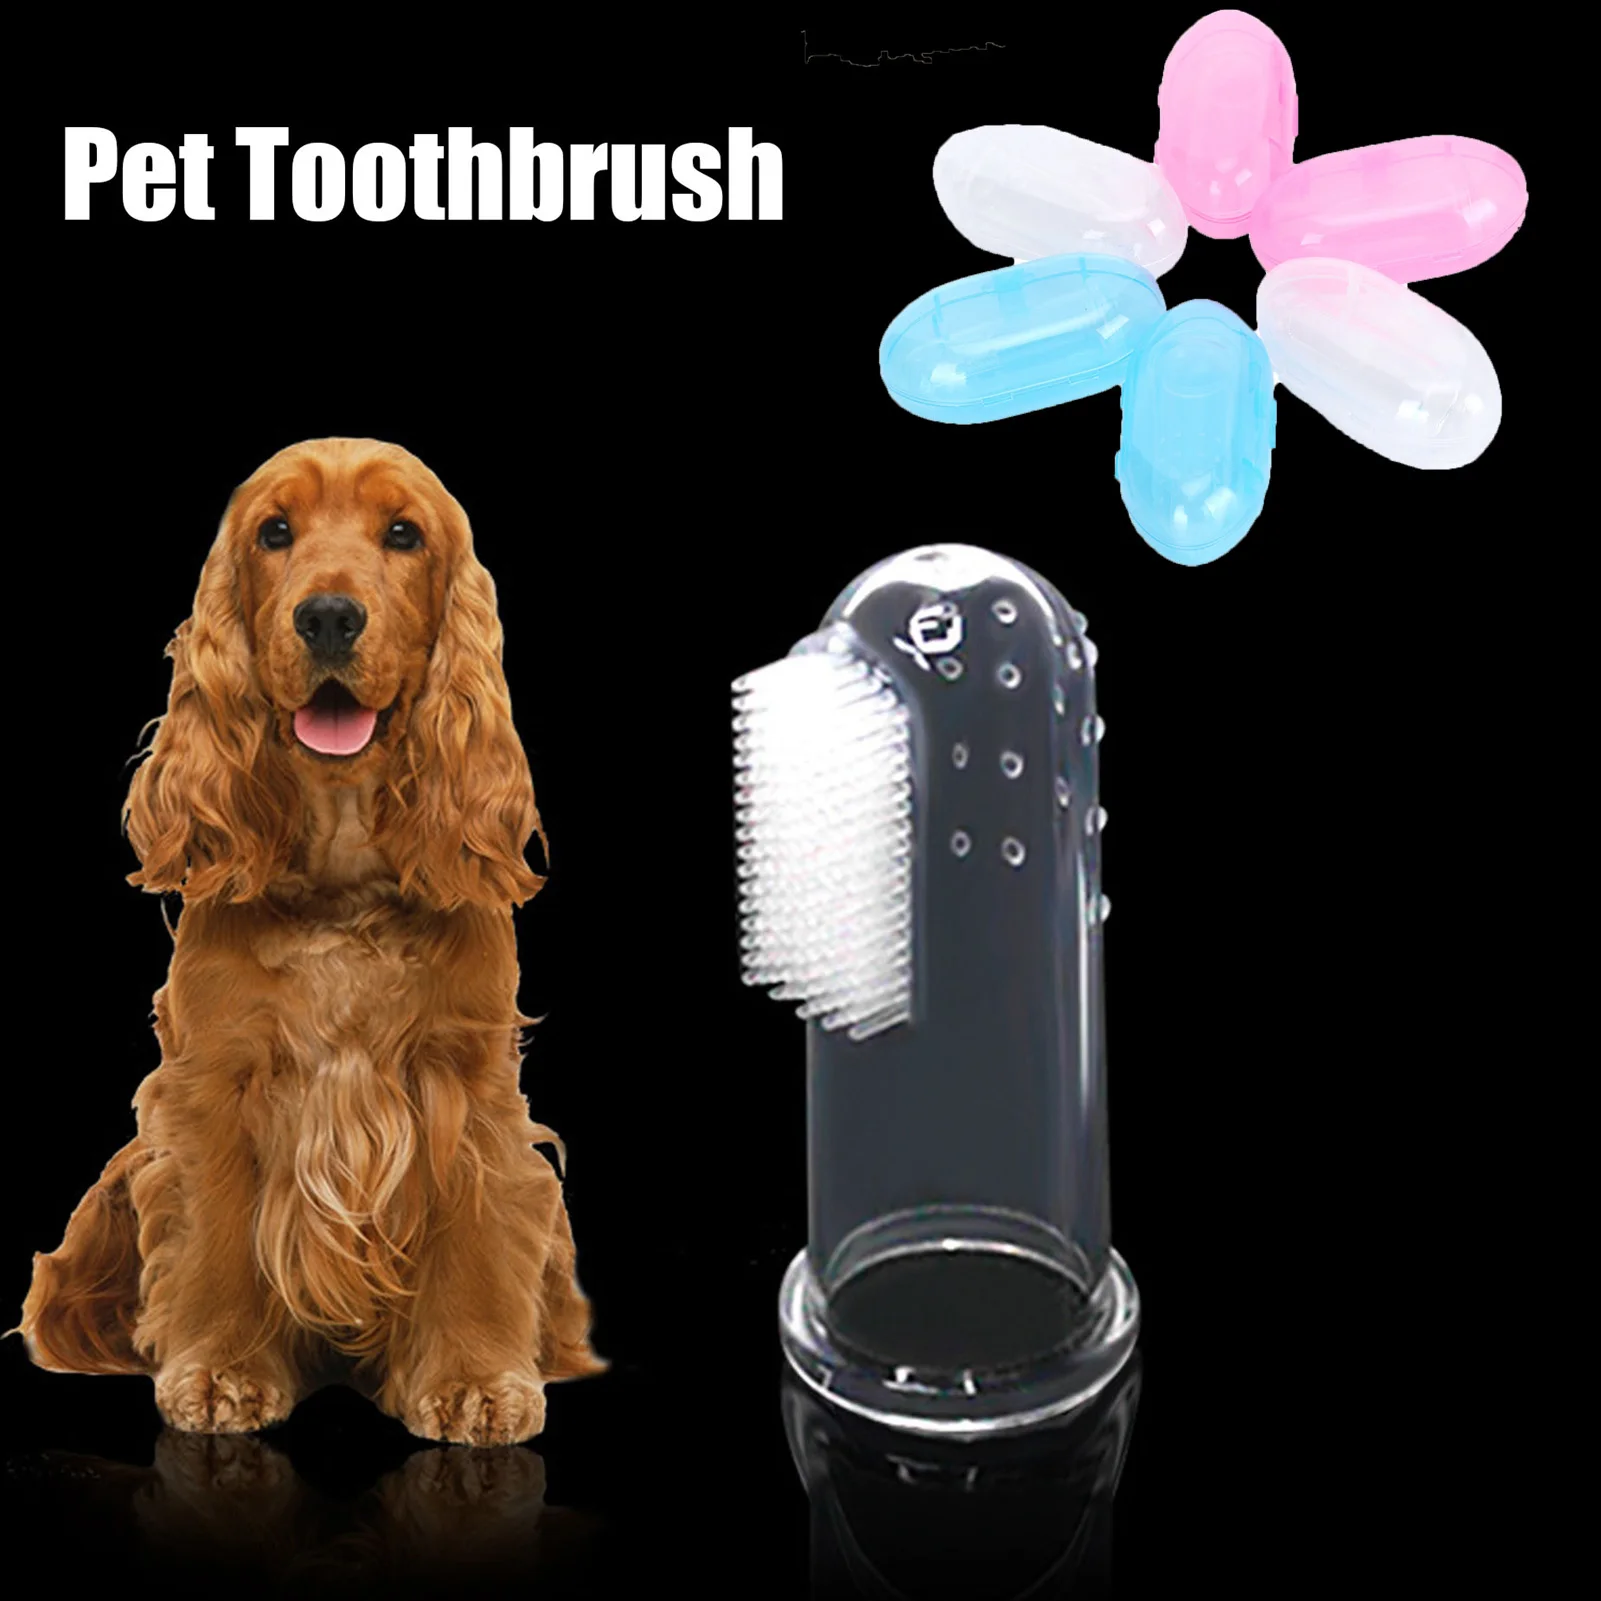 

6pcs Dog Soft Pet Finger Toothbrush Teeth Cleaning Bad Breath Care Nontoxic Silicone Tooth Brush Tool Dog Cat Cleaning Supplies